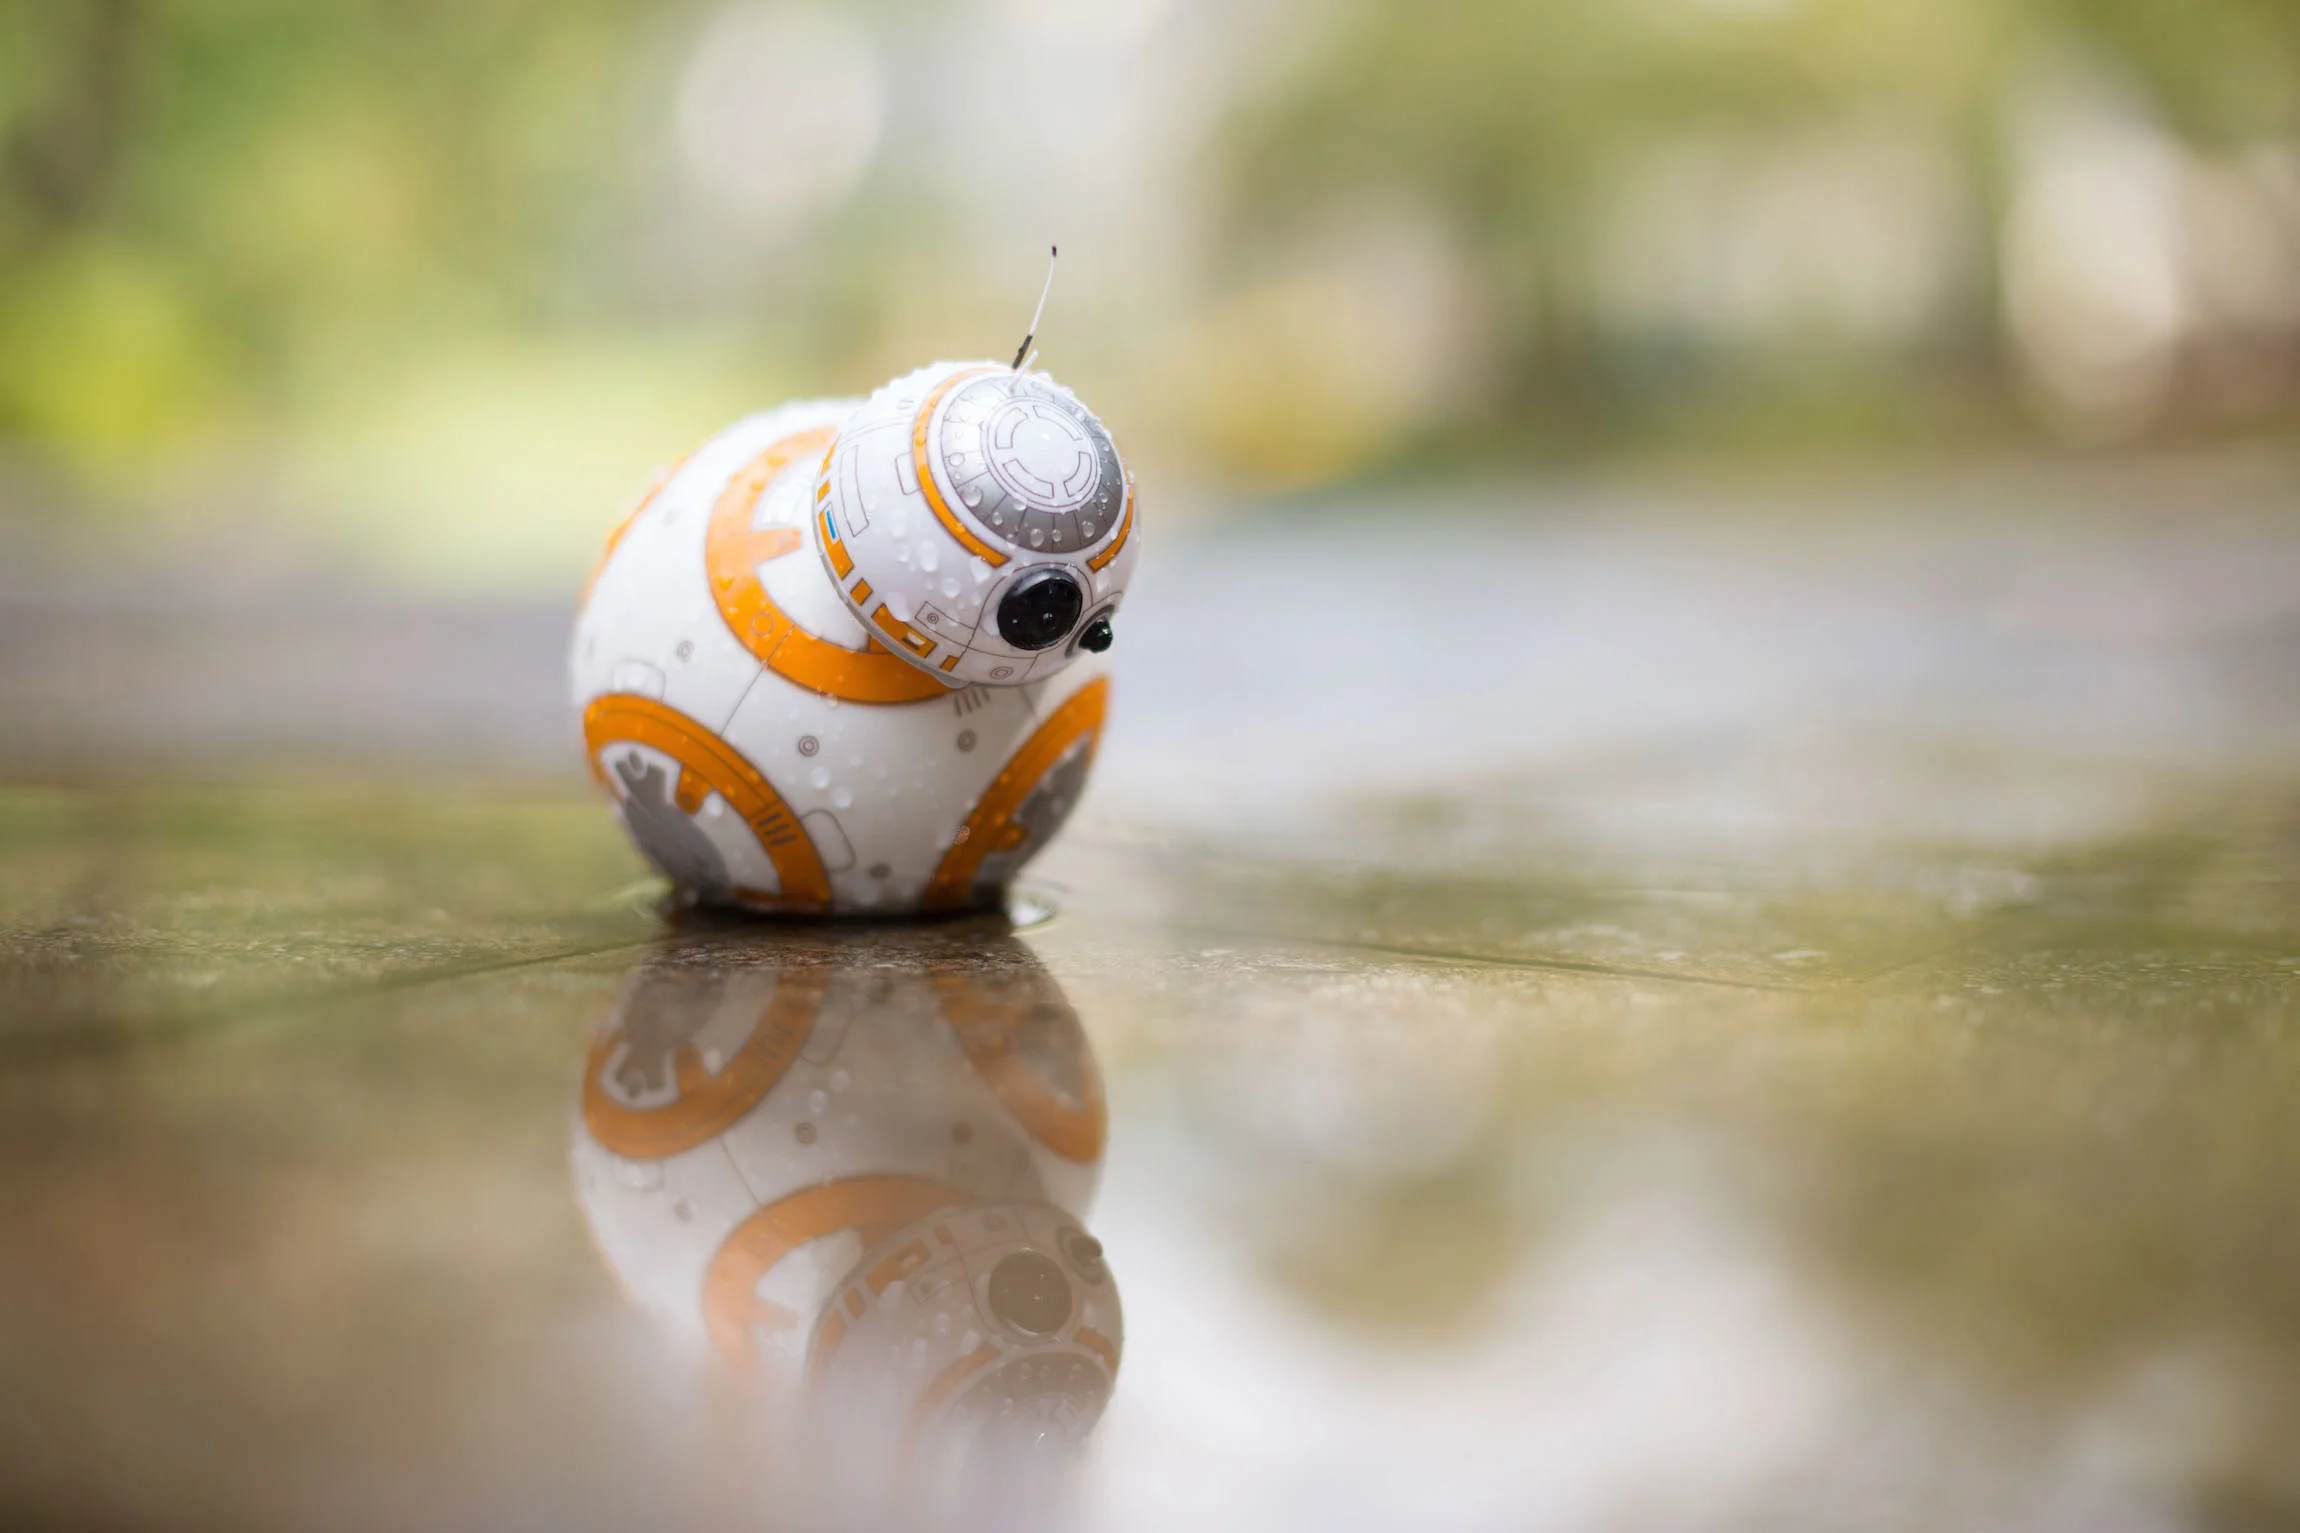 Explore Bb8 Star Wars, Star Wars Gifts, and more!